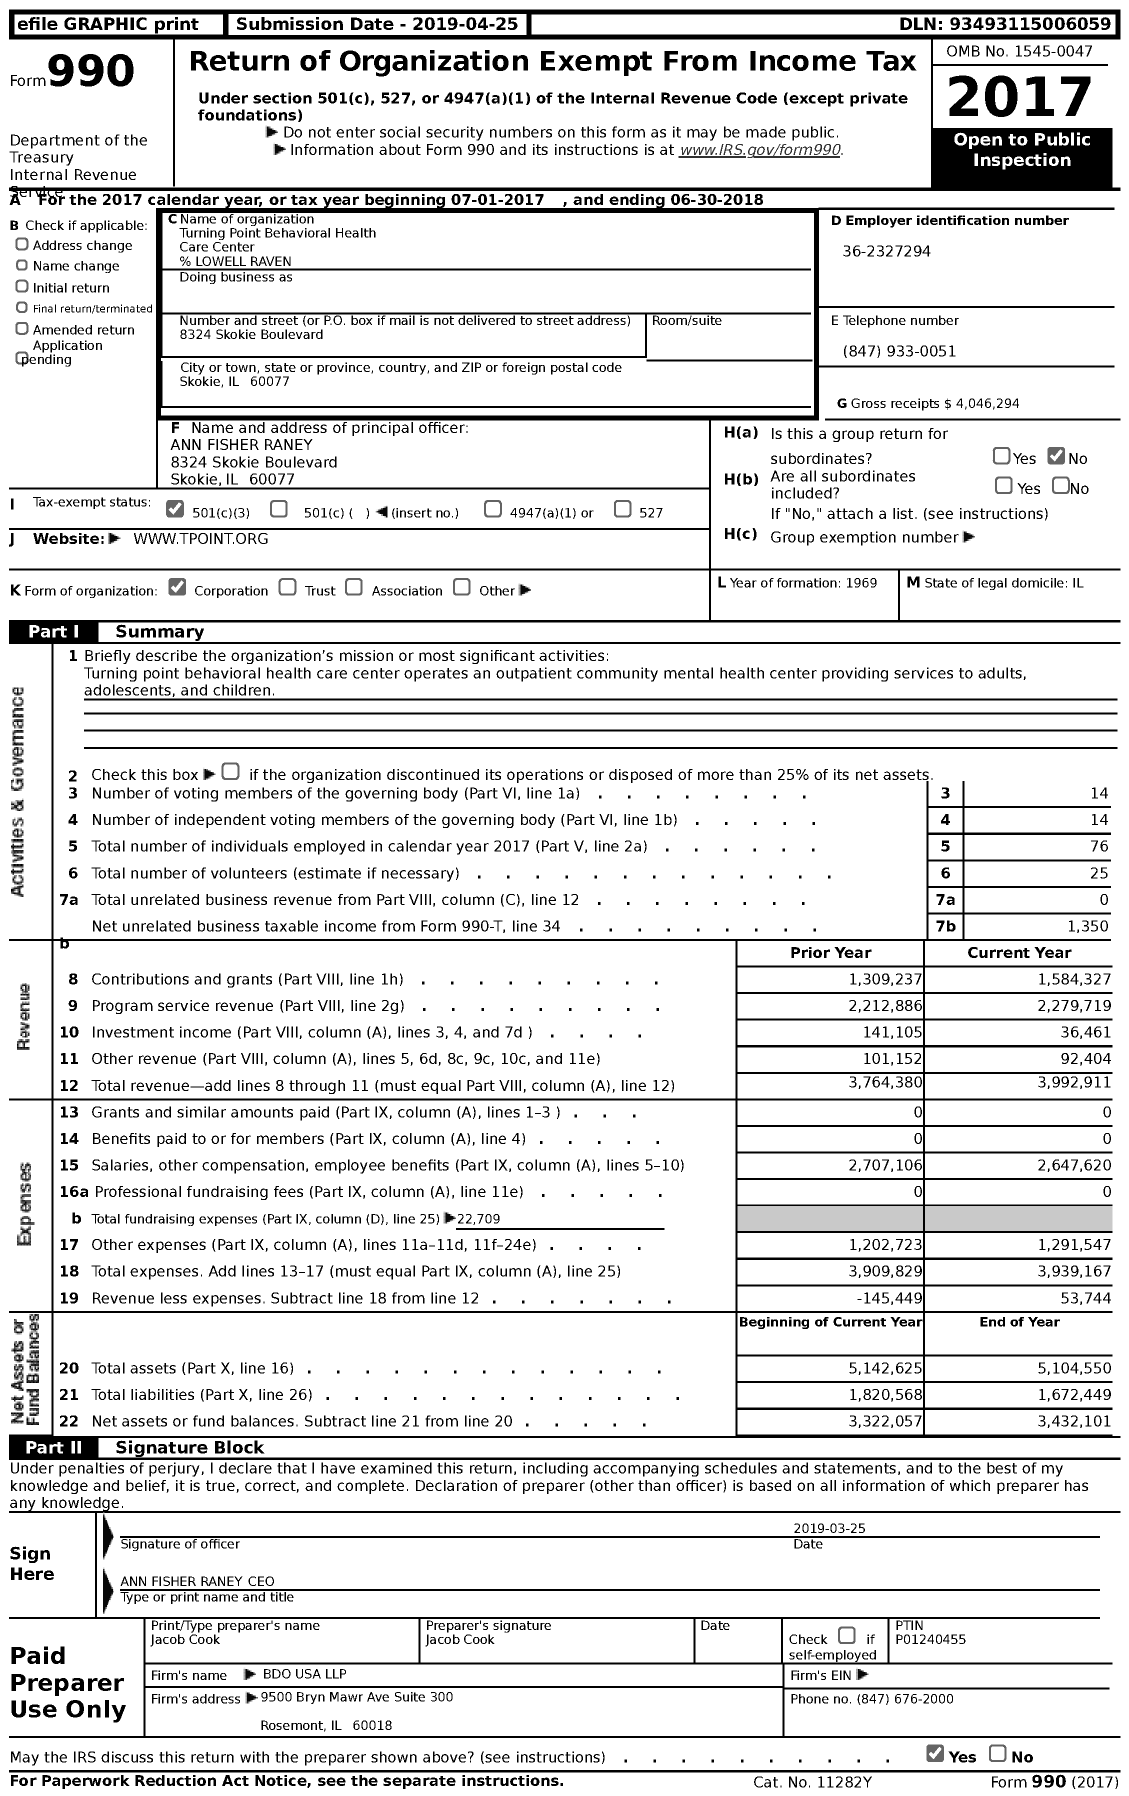 Image of first page of 2017 Form 990 for Turning Point Behavioral Health Care Center